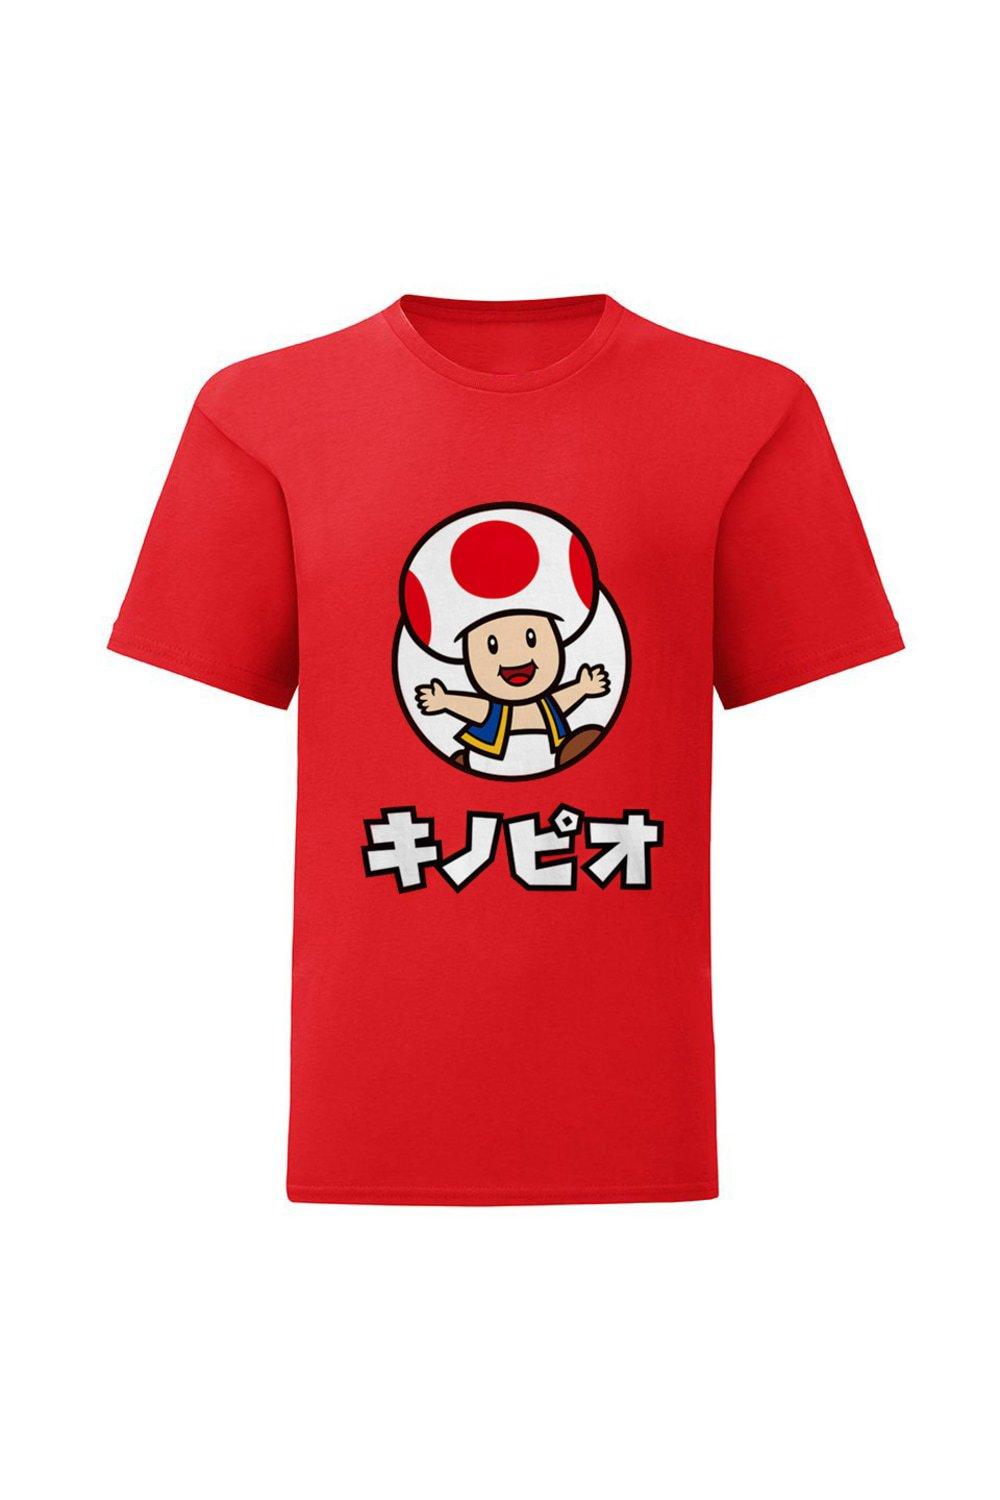 Toad T-Shirt